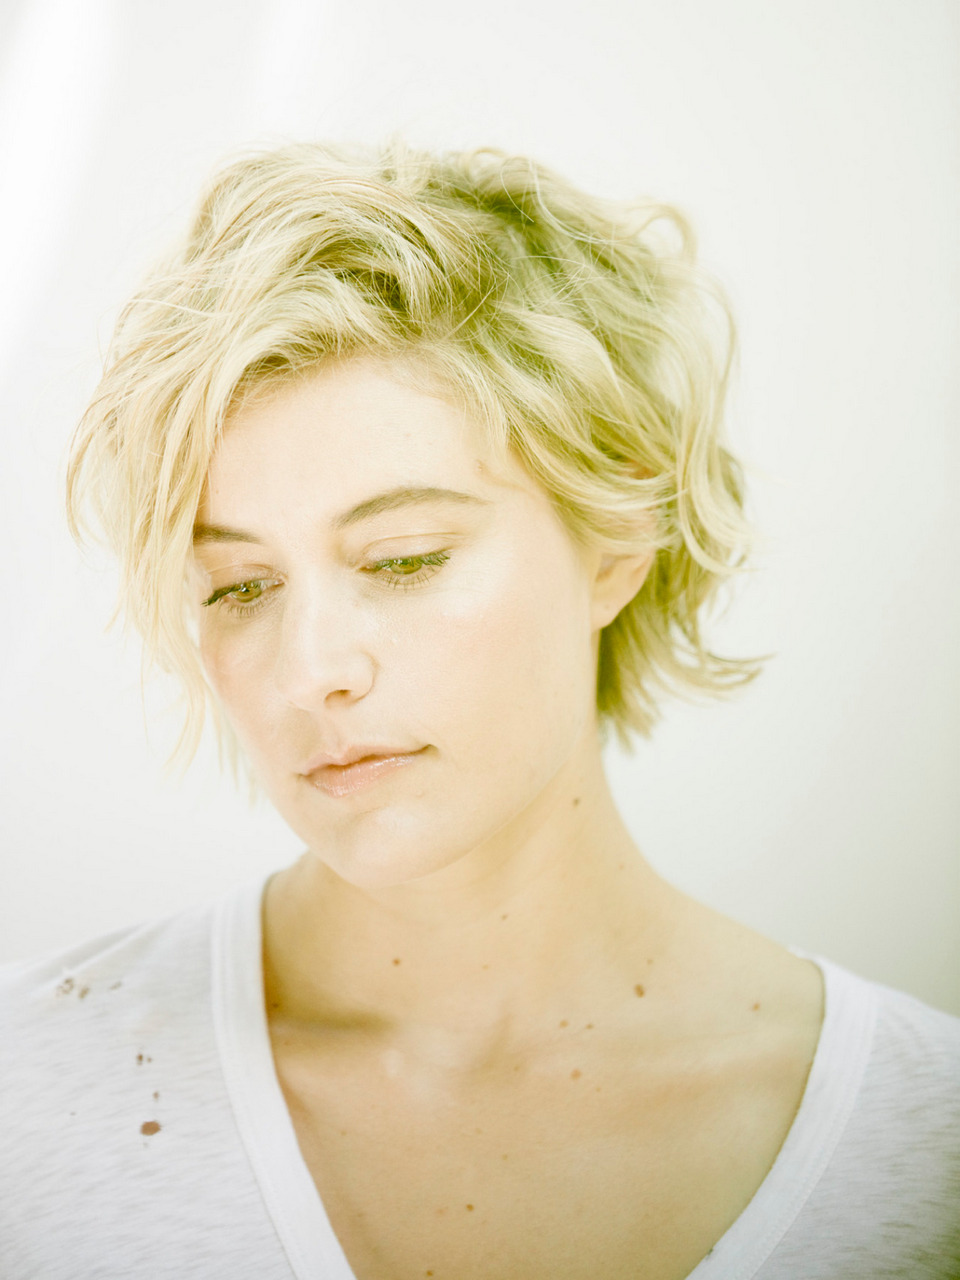 Outtakes Of Mistress Americas Greta Gerwig For